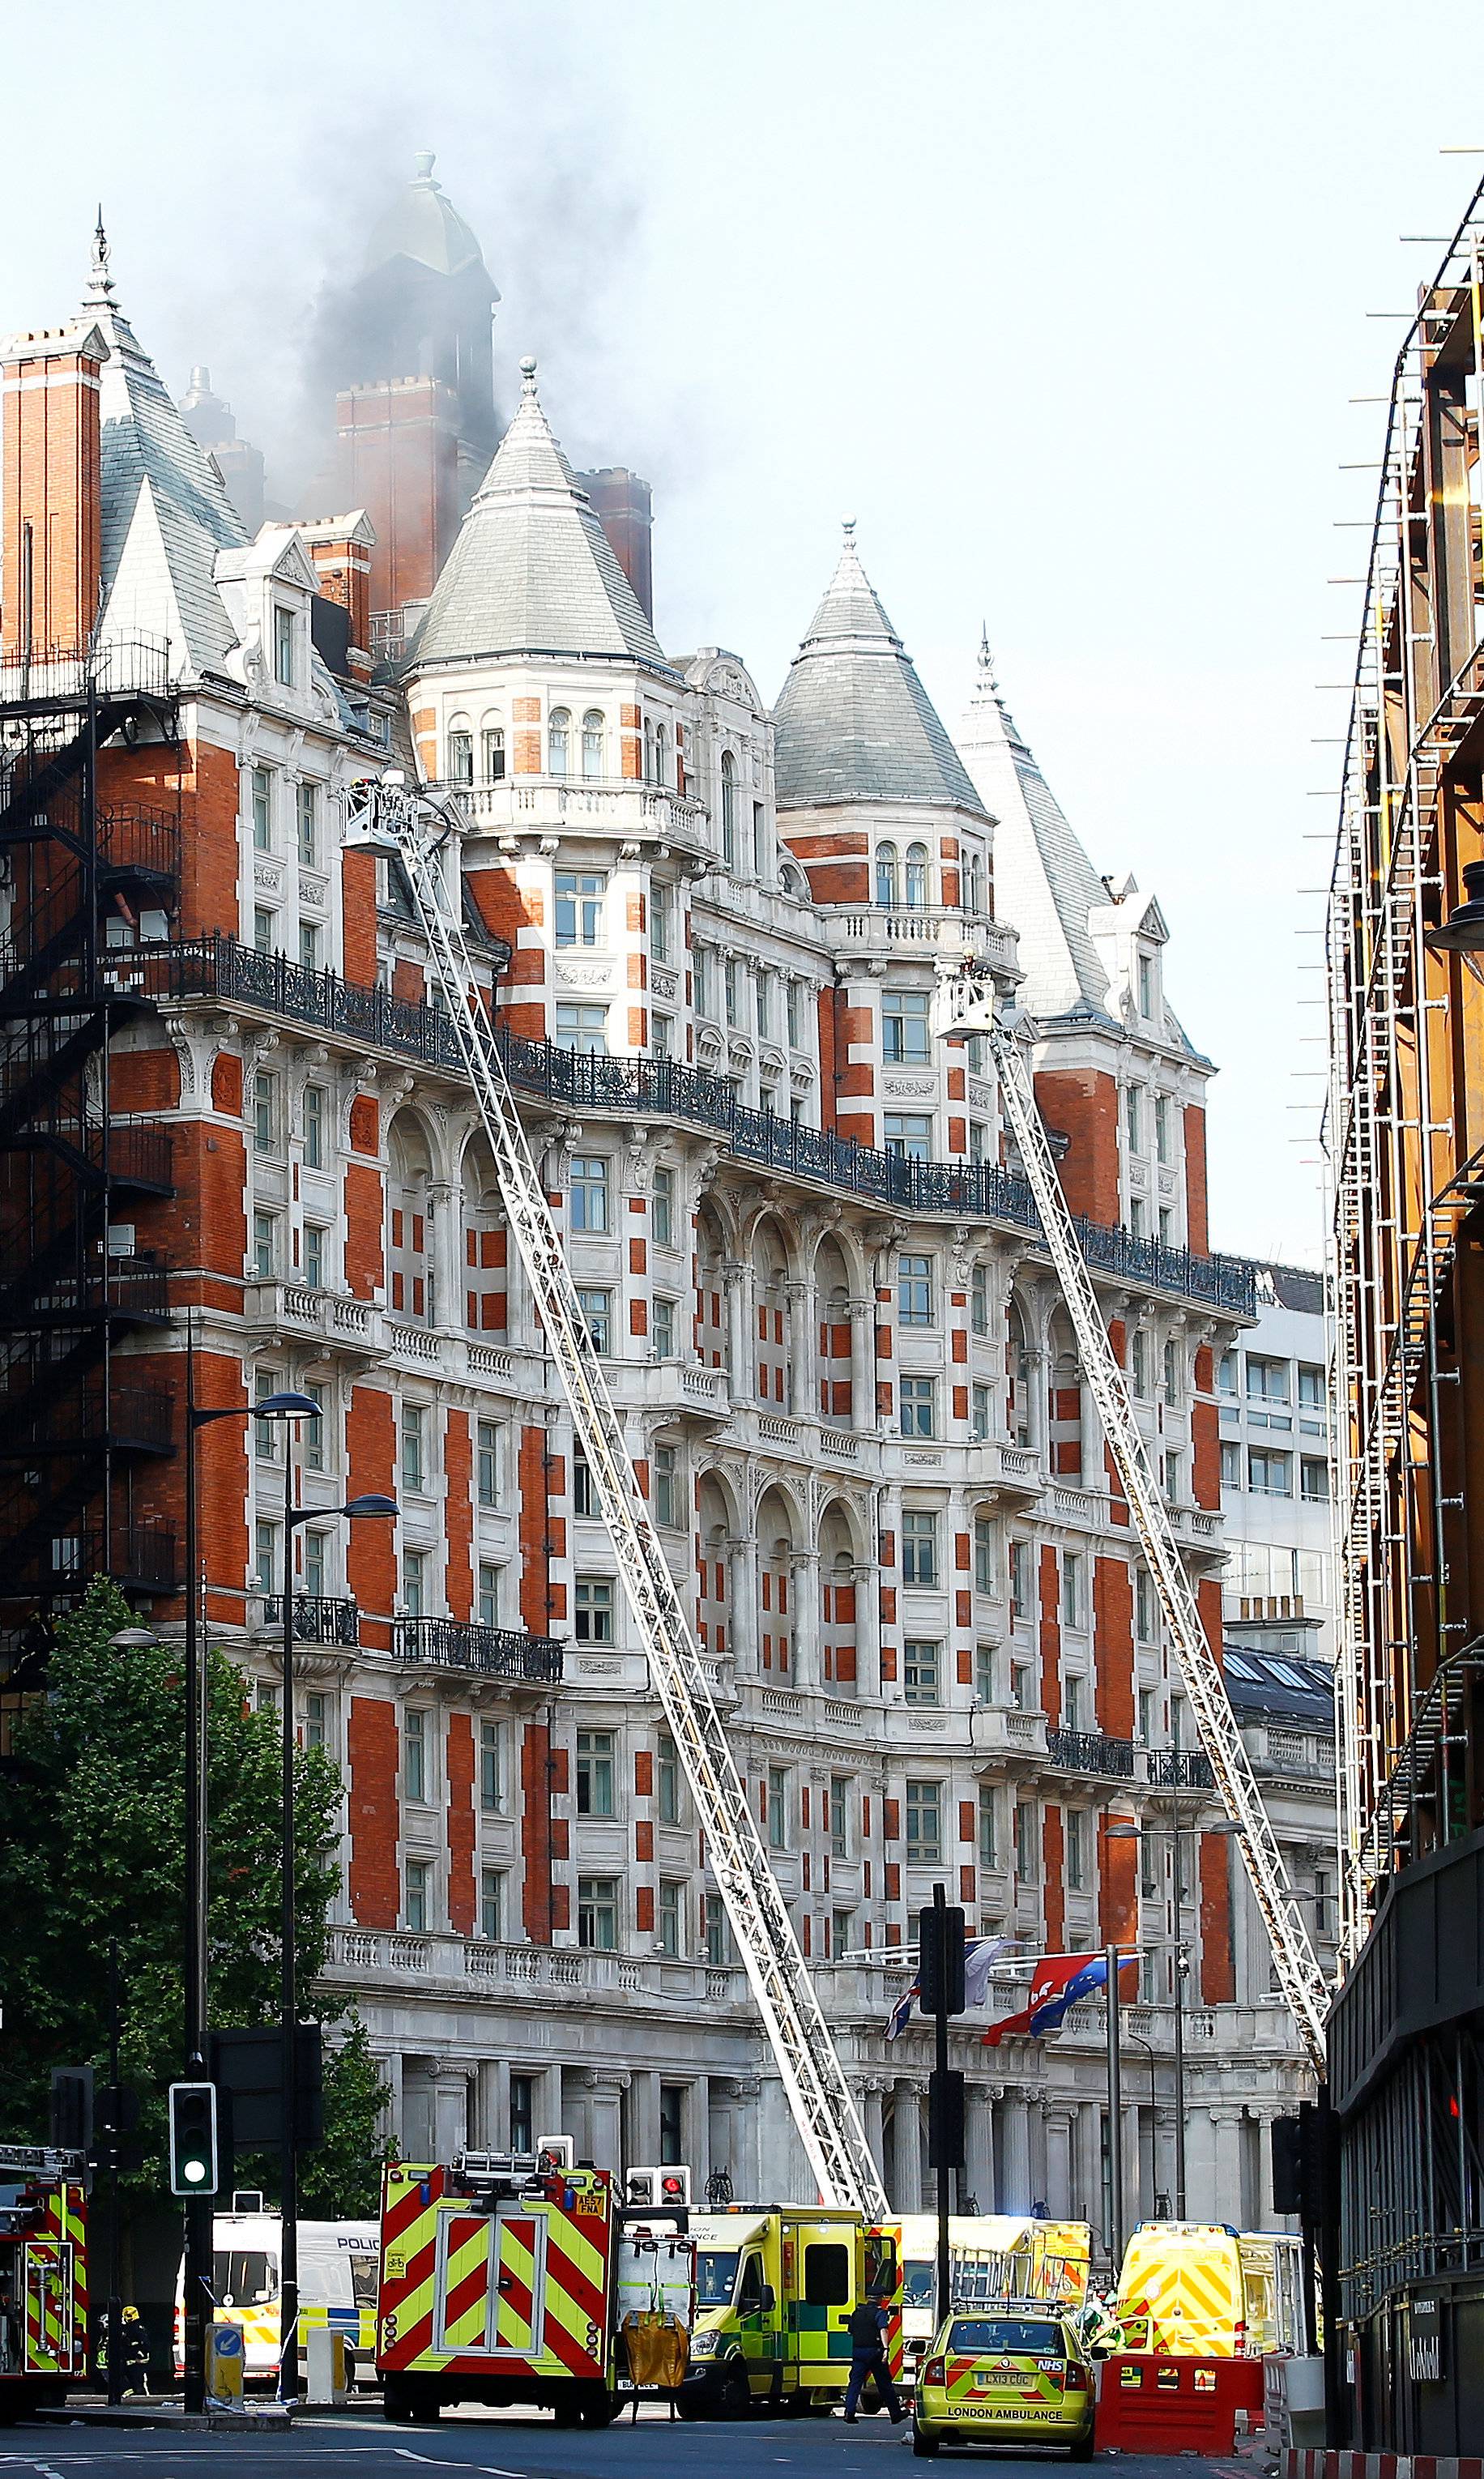 Firefighters tackle a blaze at the Mandarin Oriental Hotel in Knightsbridge, central London